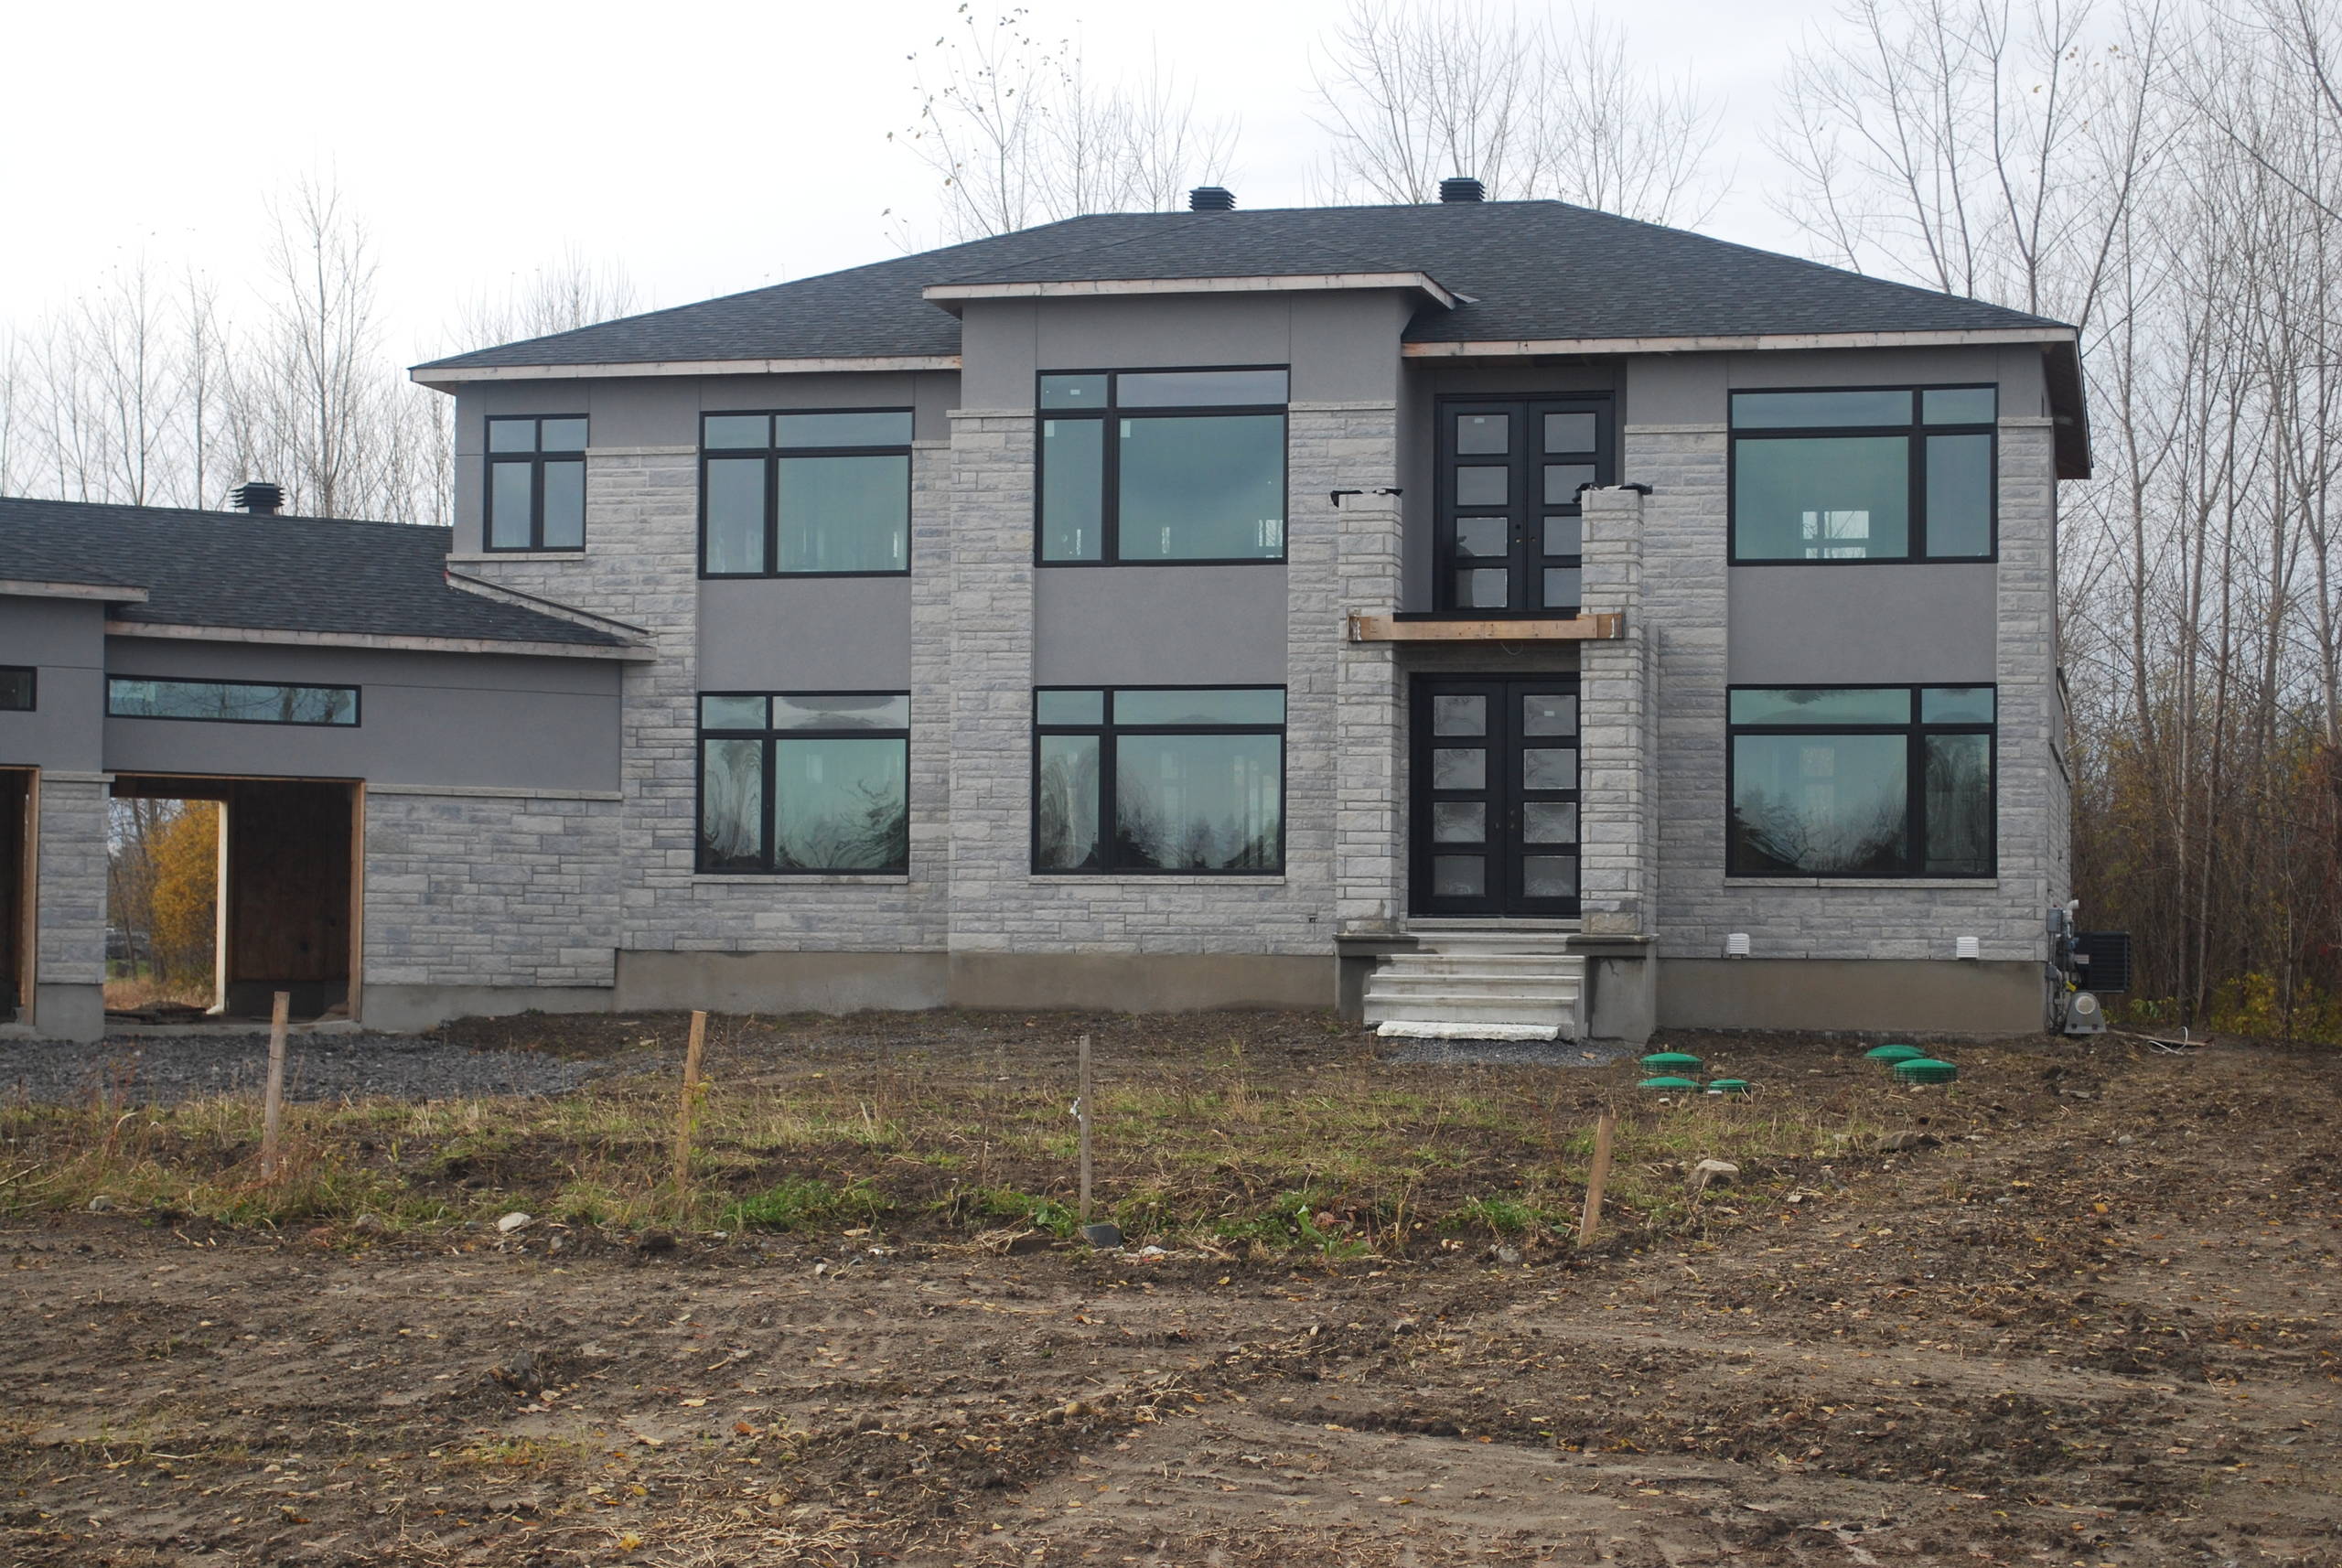 Projects Under Construction - 6000sqft Contemporary